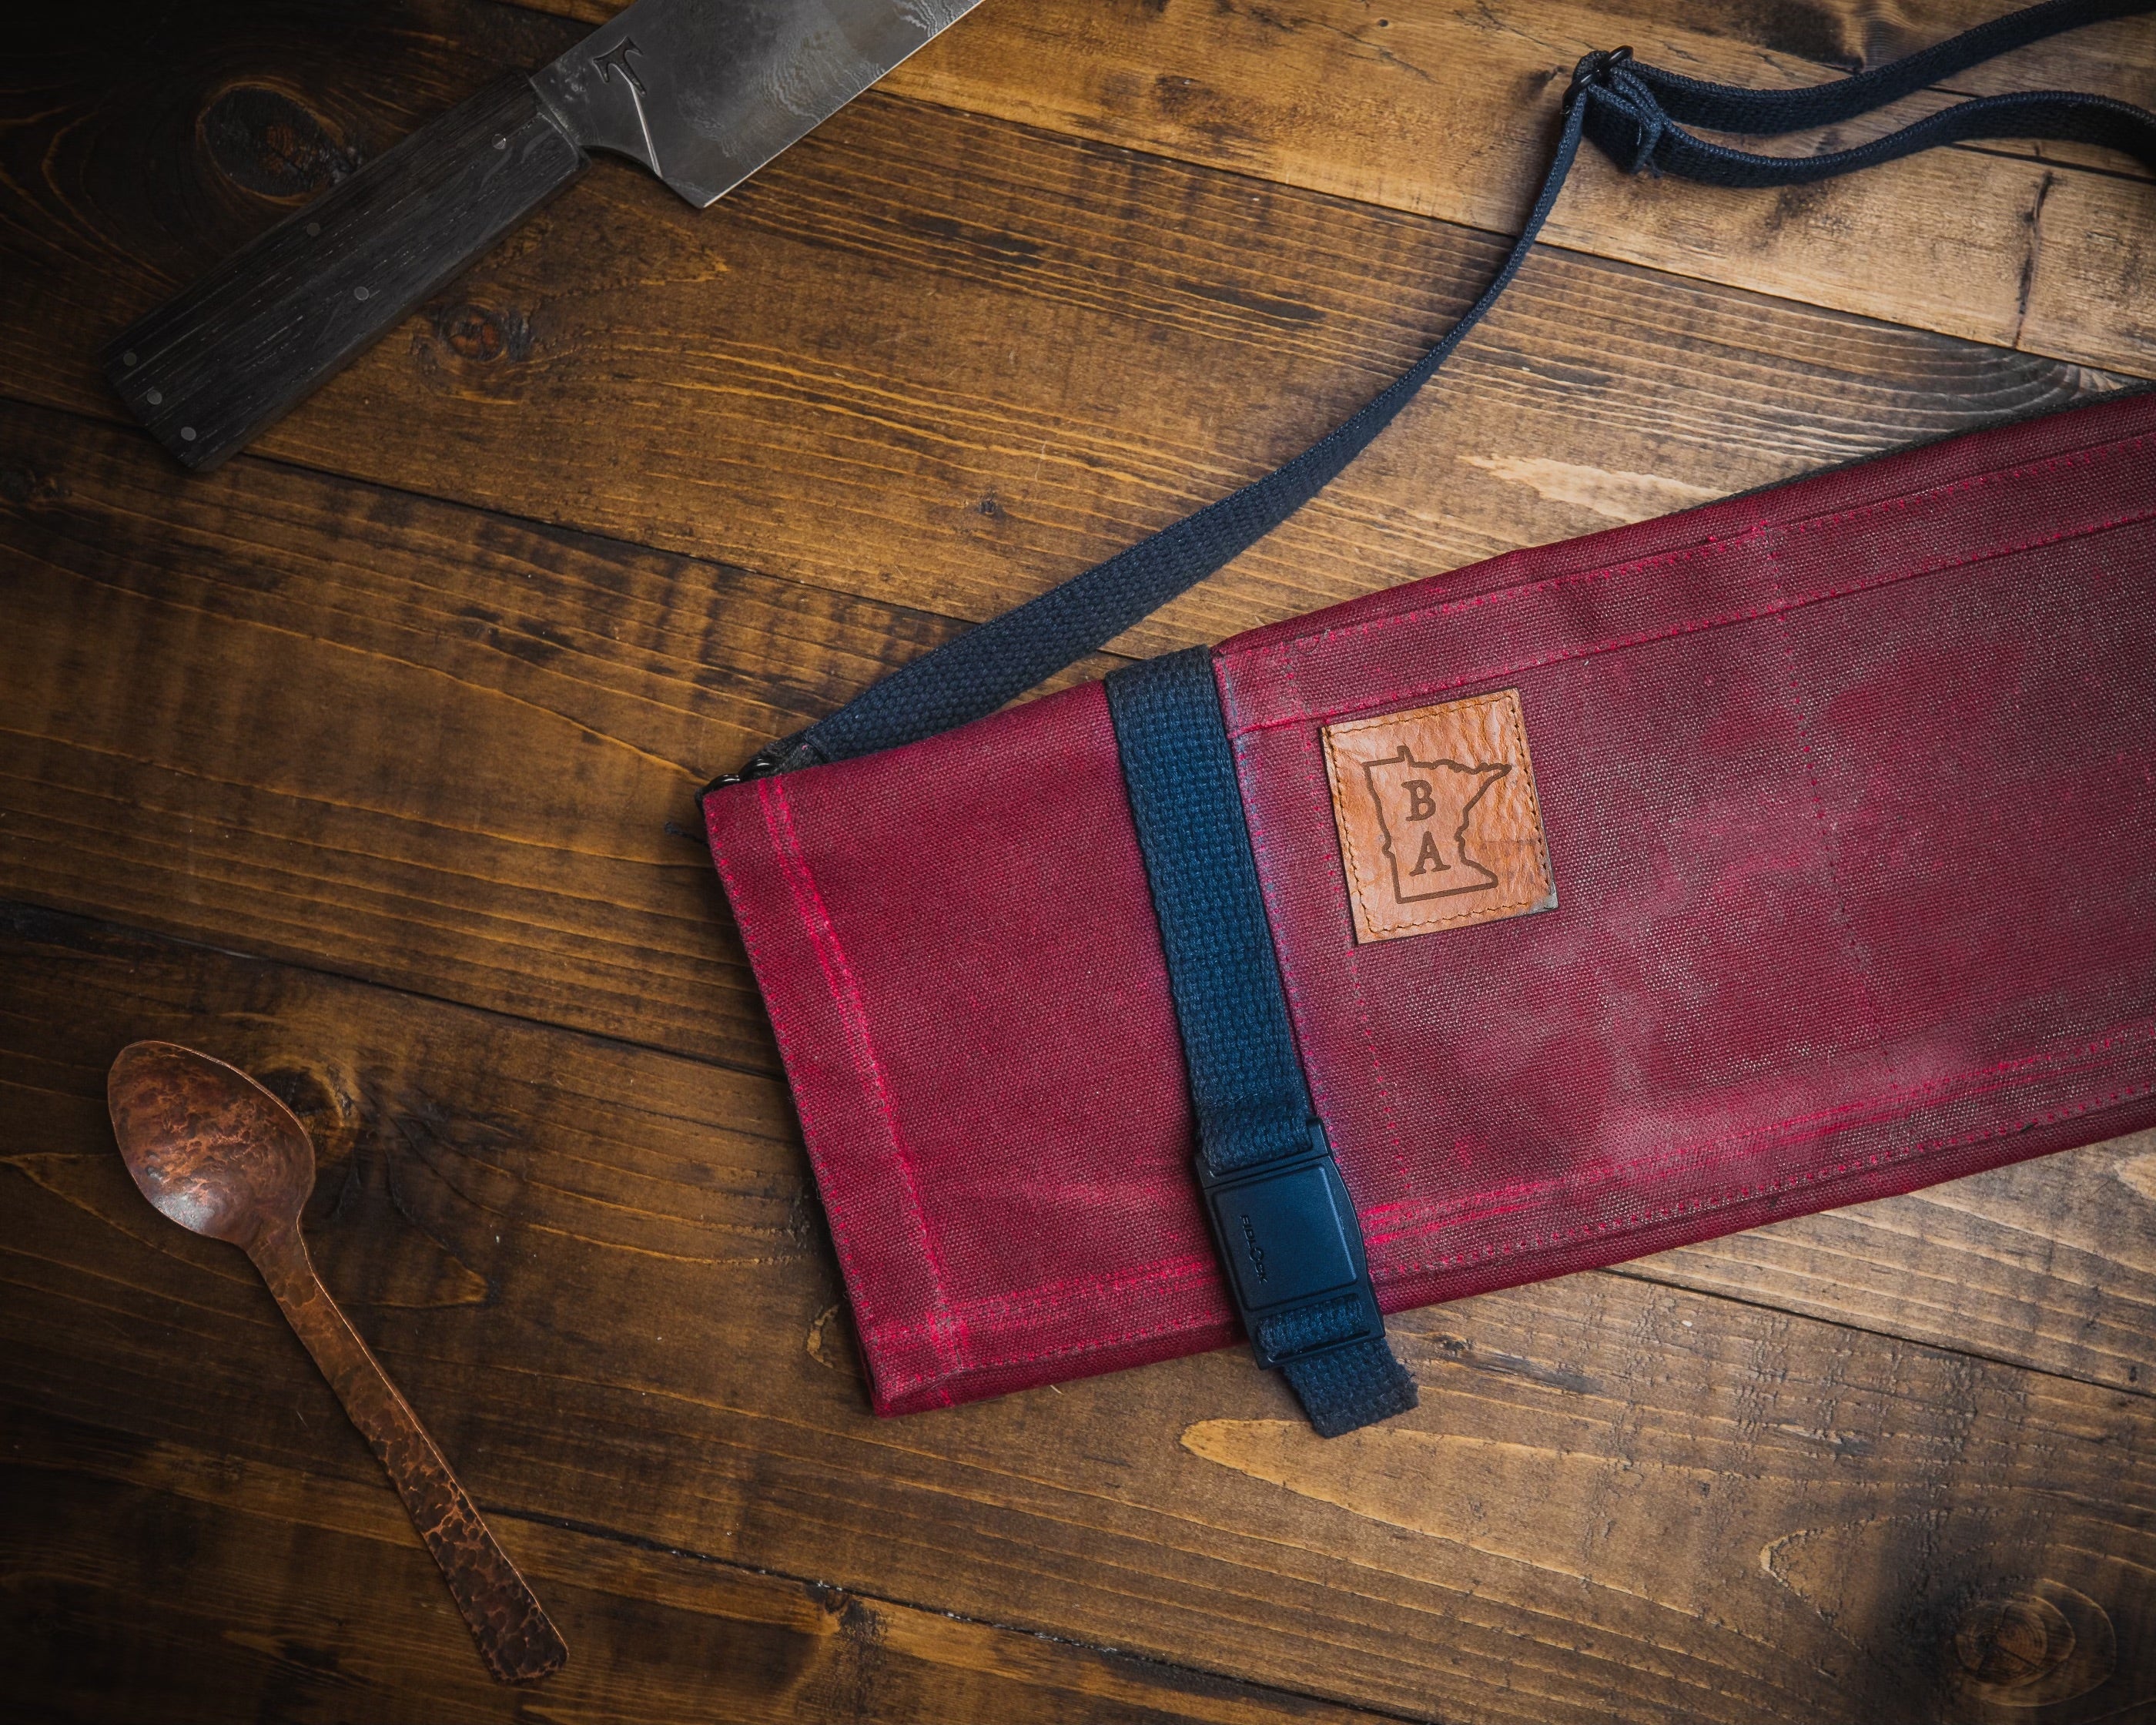 Product shot of the burgundy Main Squeeze roll on a wooden surface next to a knife and copper hammered spoon. The cotton water repellant and flame resistant knife roll was designed by Craftmade Aprons, Minnesota.